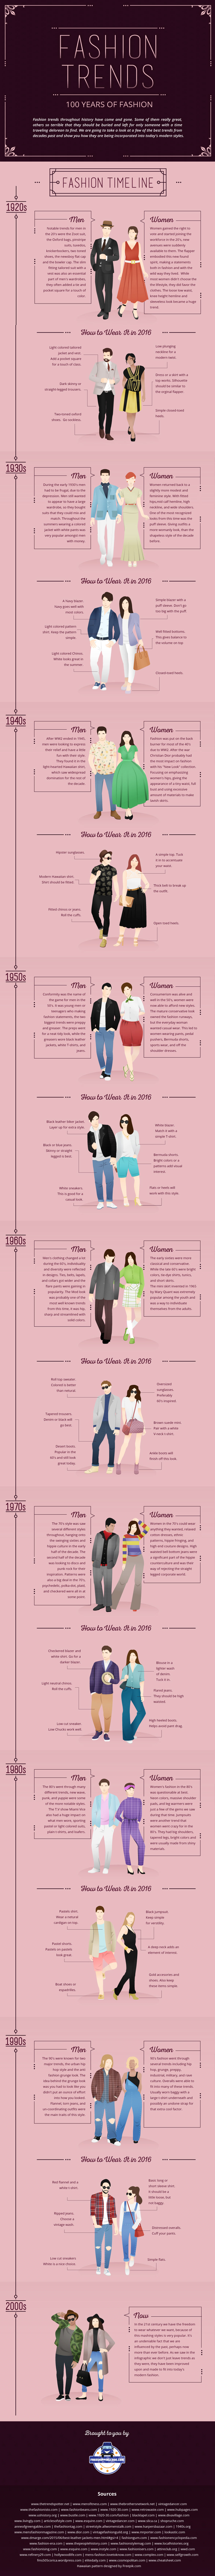 How to Wear the Fashion Trends through the Decades Infographic